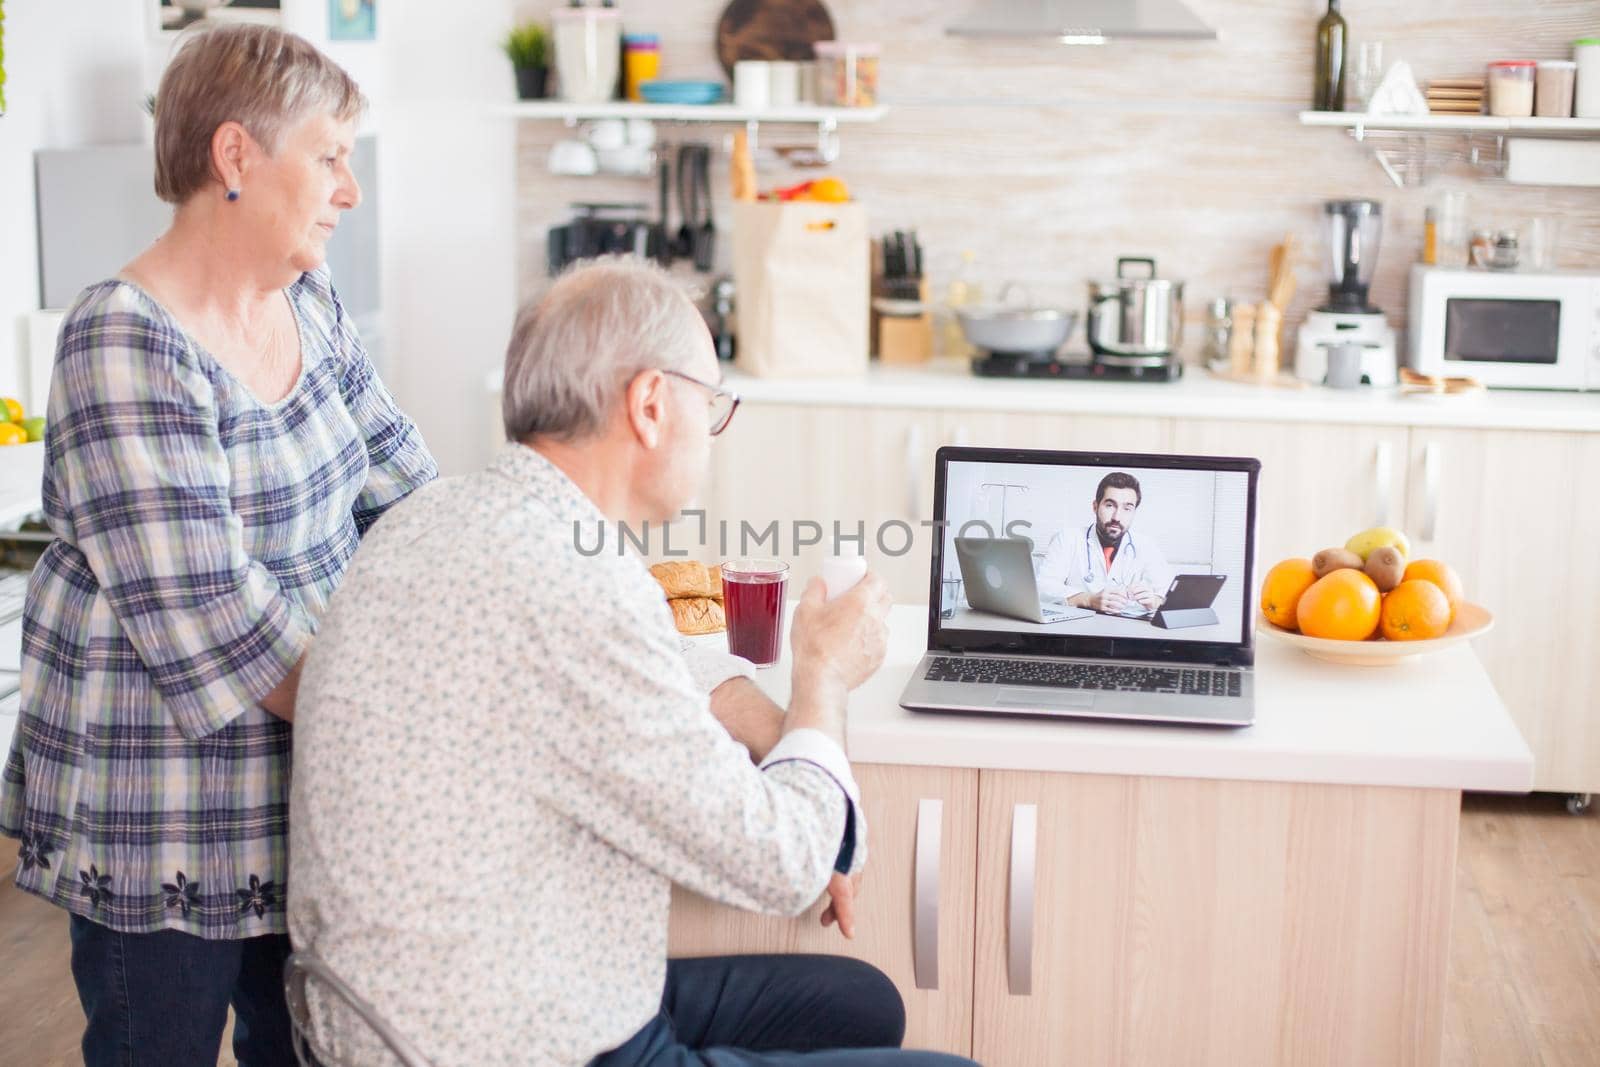 Video conference with doctor using laptop in kitchen. Online health consultation for elderly people drugs ilness advice on symptoms, physician telemedicine webcam. Medical care internet chat